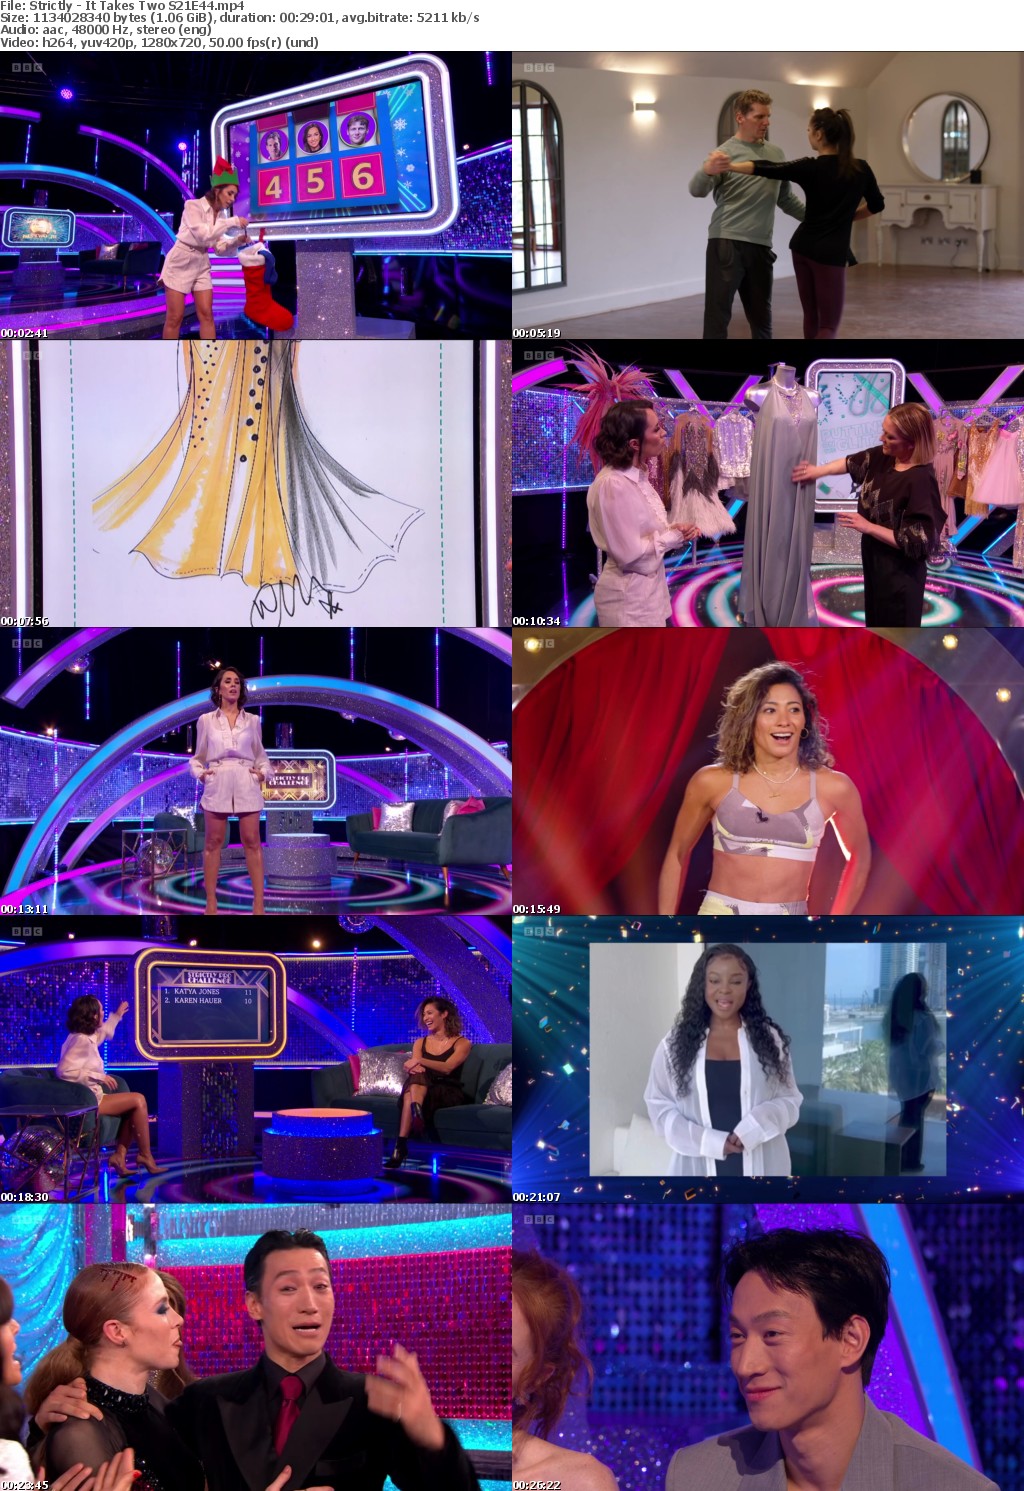 Strictly - It Takes Two S21E44 (1280x720p HD, 50fps, soft Eng subs)